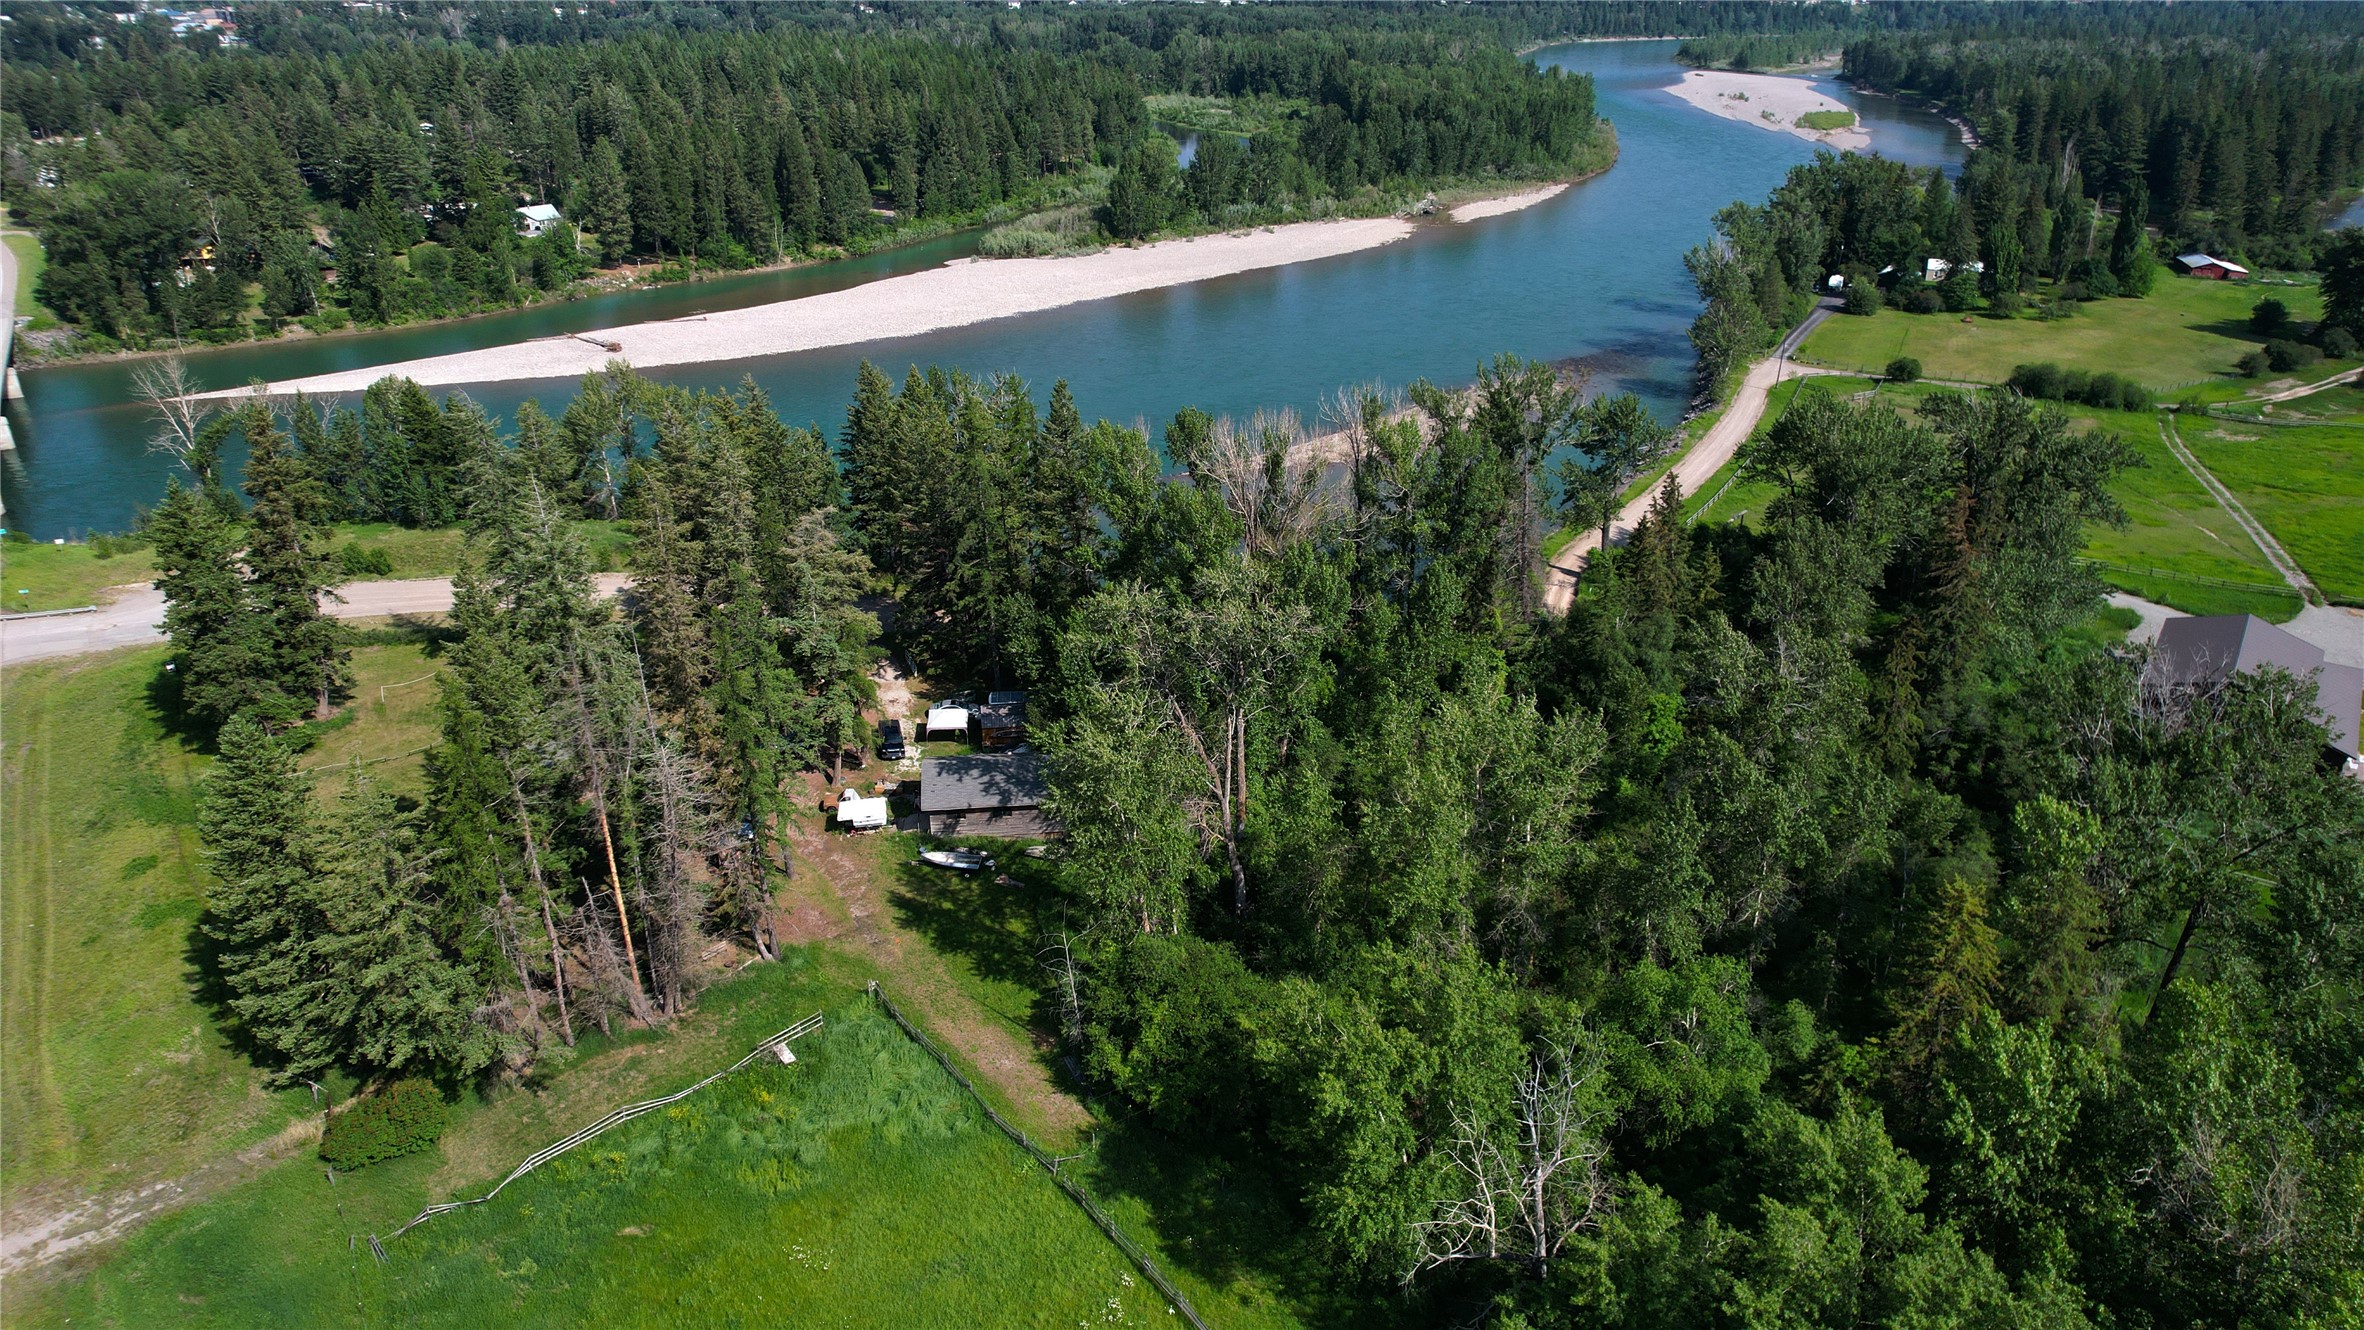 A rare opportunity with over 500 feet of prime Flathead River frontage. Having the ability to go down to the river and fish adds a whole new dimension to the properties appeal. With 12+ acres there's plenty of space to create your dream hobby farm with vegetable gardens, chickens, rabbits, goats, and horses. Let your imagination run wild  Drop your kayak, paddle board, or fish from the shore. Just minutes from Columbia Falls with panoramic and breathtaking views of Glacier Park and Swan Mountain Range. Landscaped with rock outcroppings and flower beds. The partially finished detached two level shop is heated with a wood burning fireplace. Included is a tack room space, hay storage, and workroom area. Having 1,300 feet of Hwy 2 frontage adds convenience and accessibility. Please call Jeannie DeCarlo at 406.471.8546 or your real estate professional.